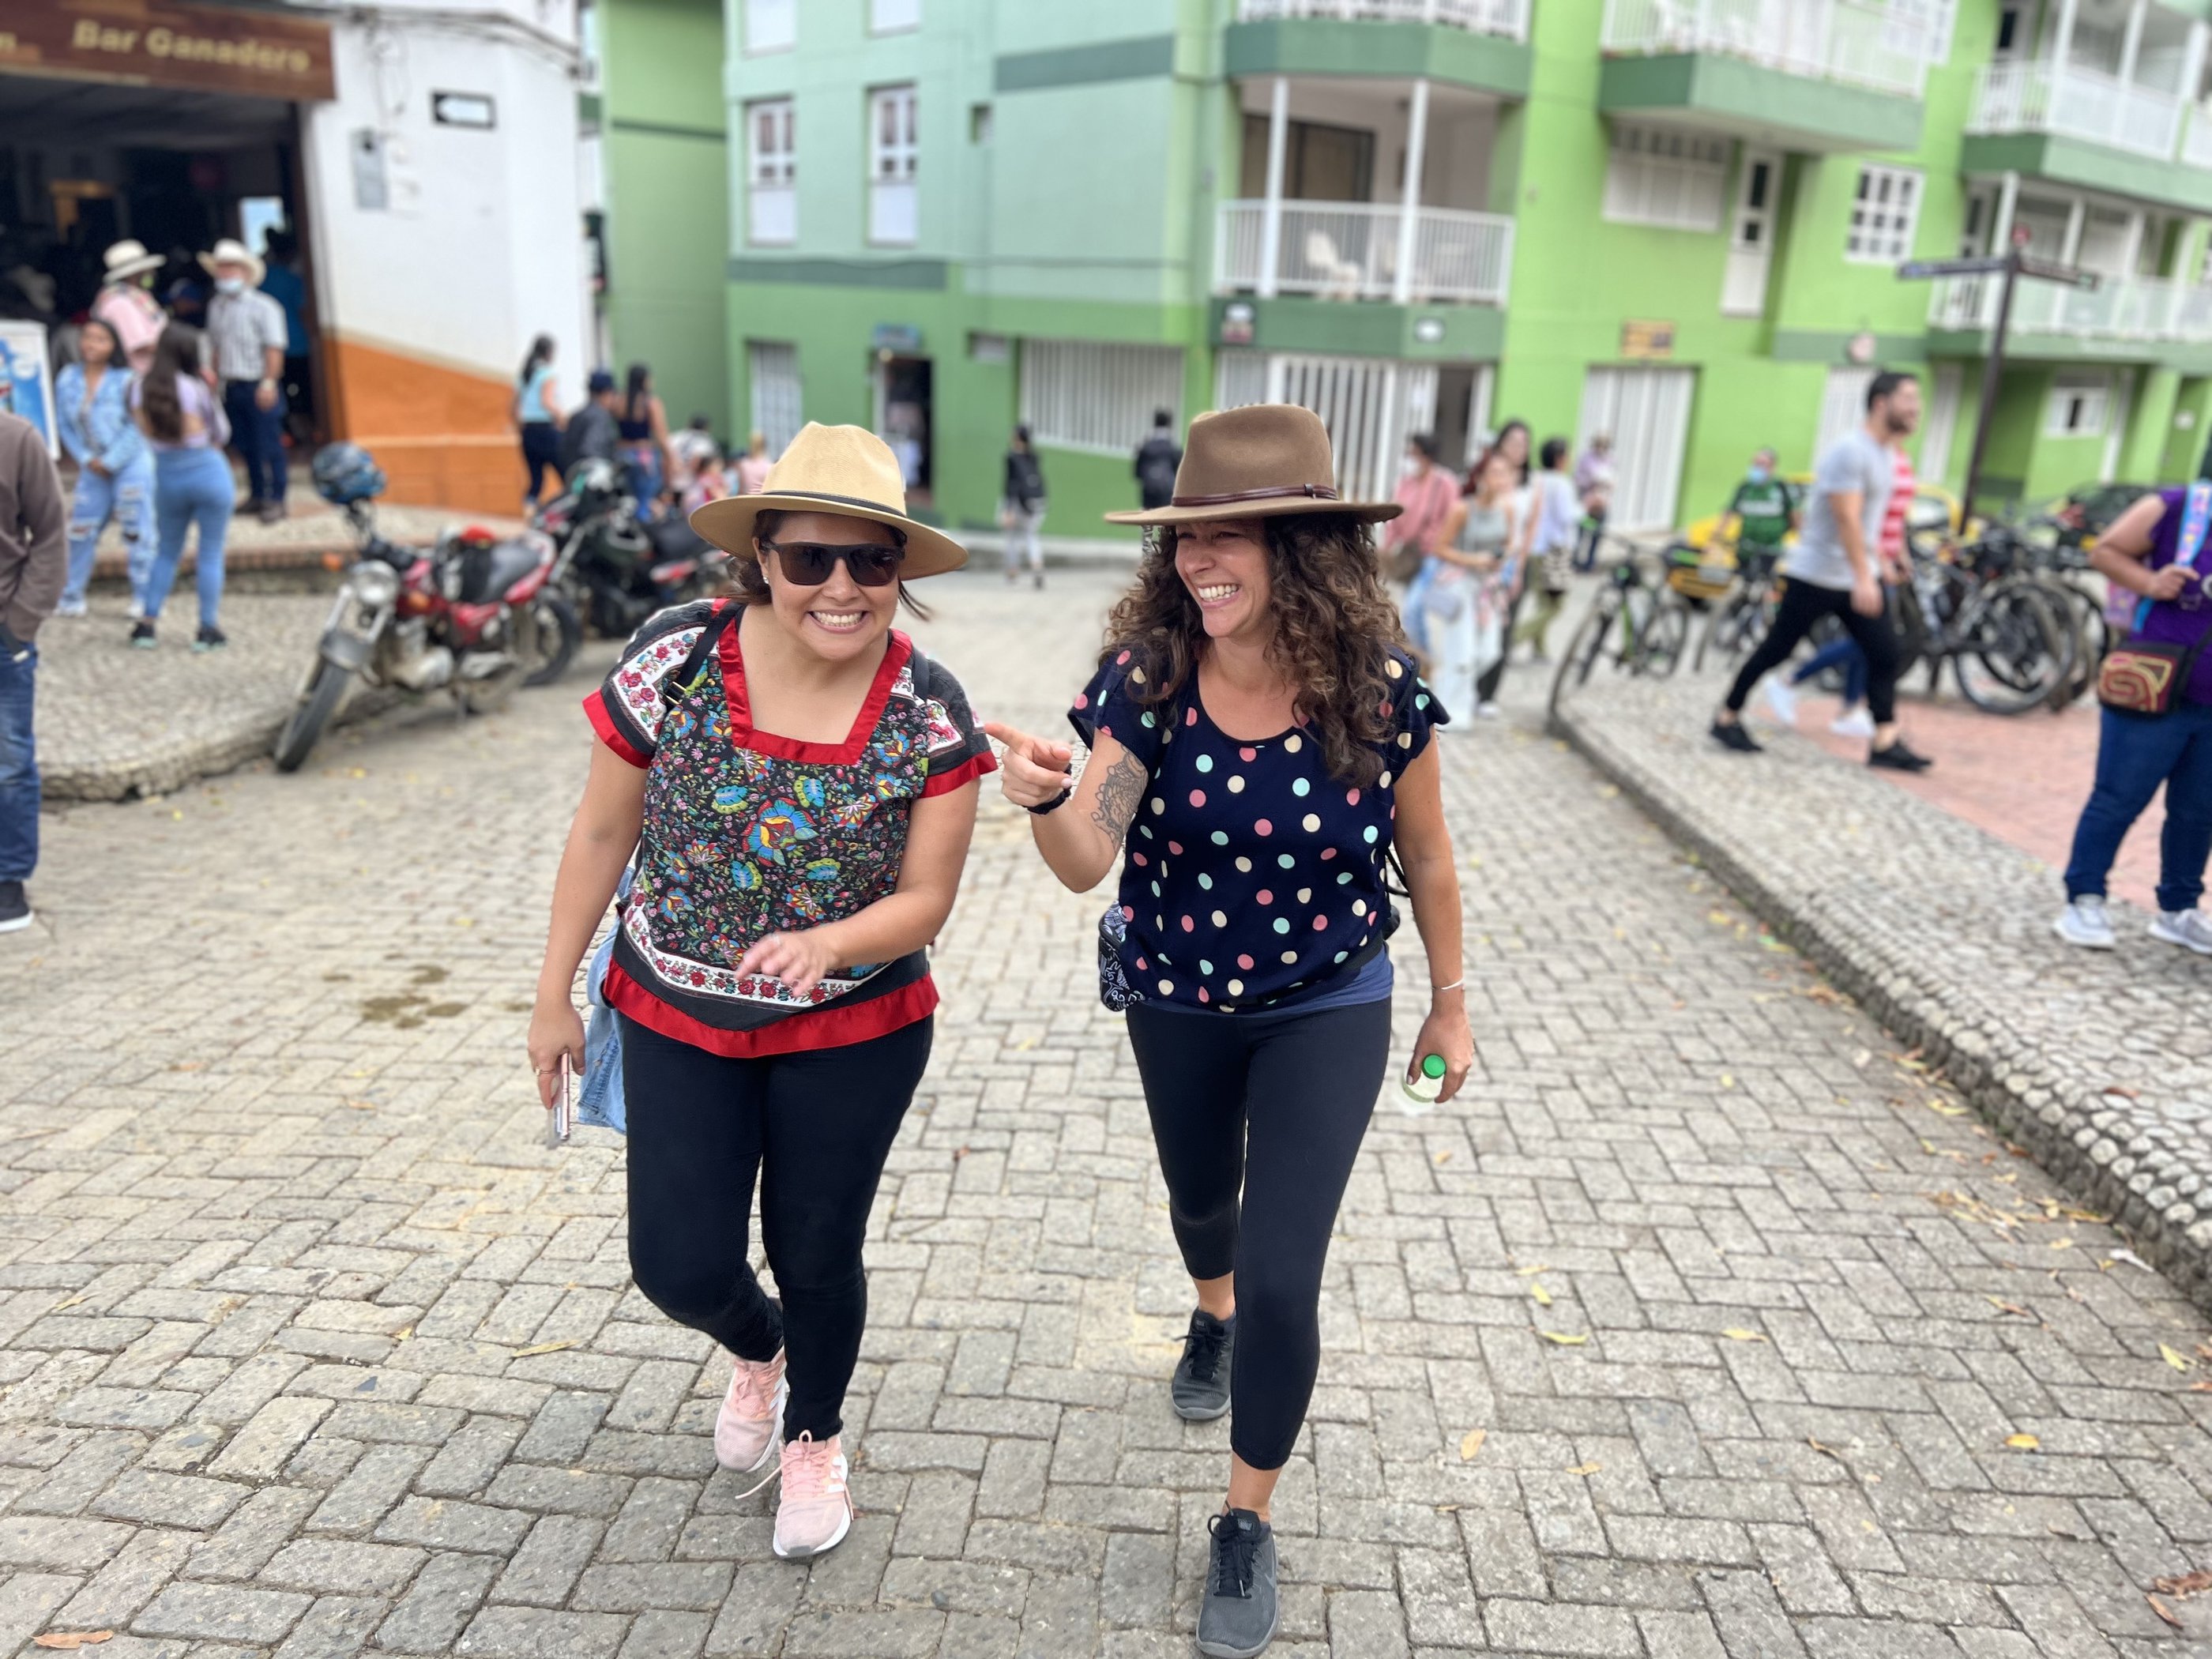 Two woman with hats on walking through the streets of Colombia. Green building in the background